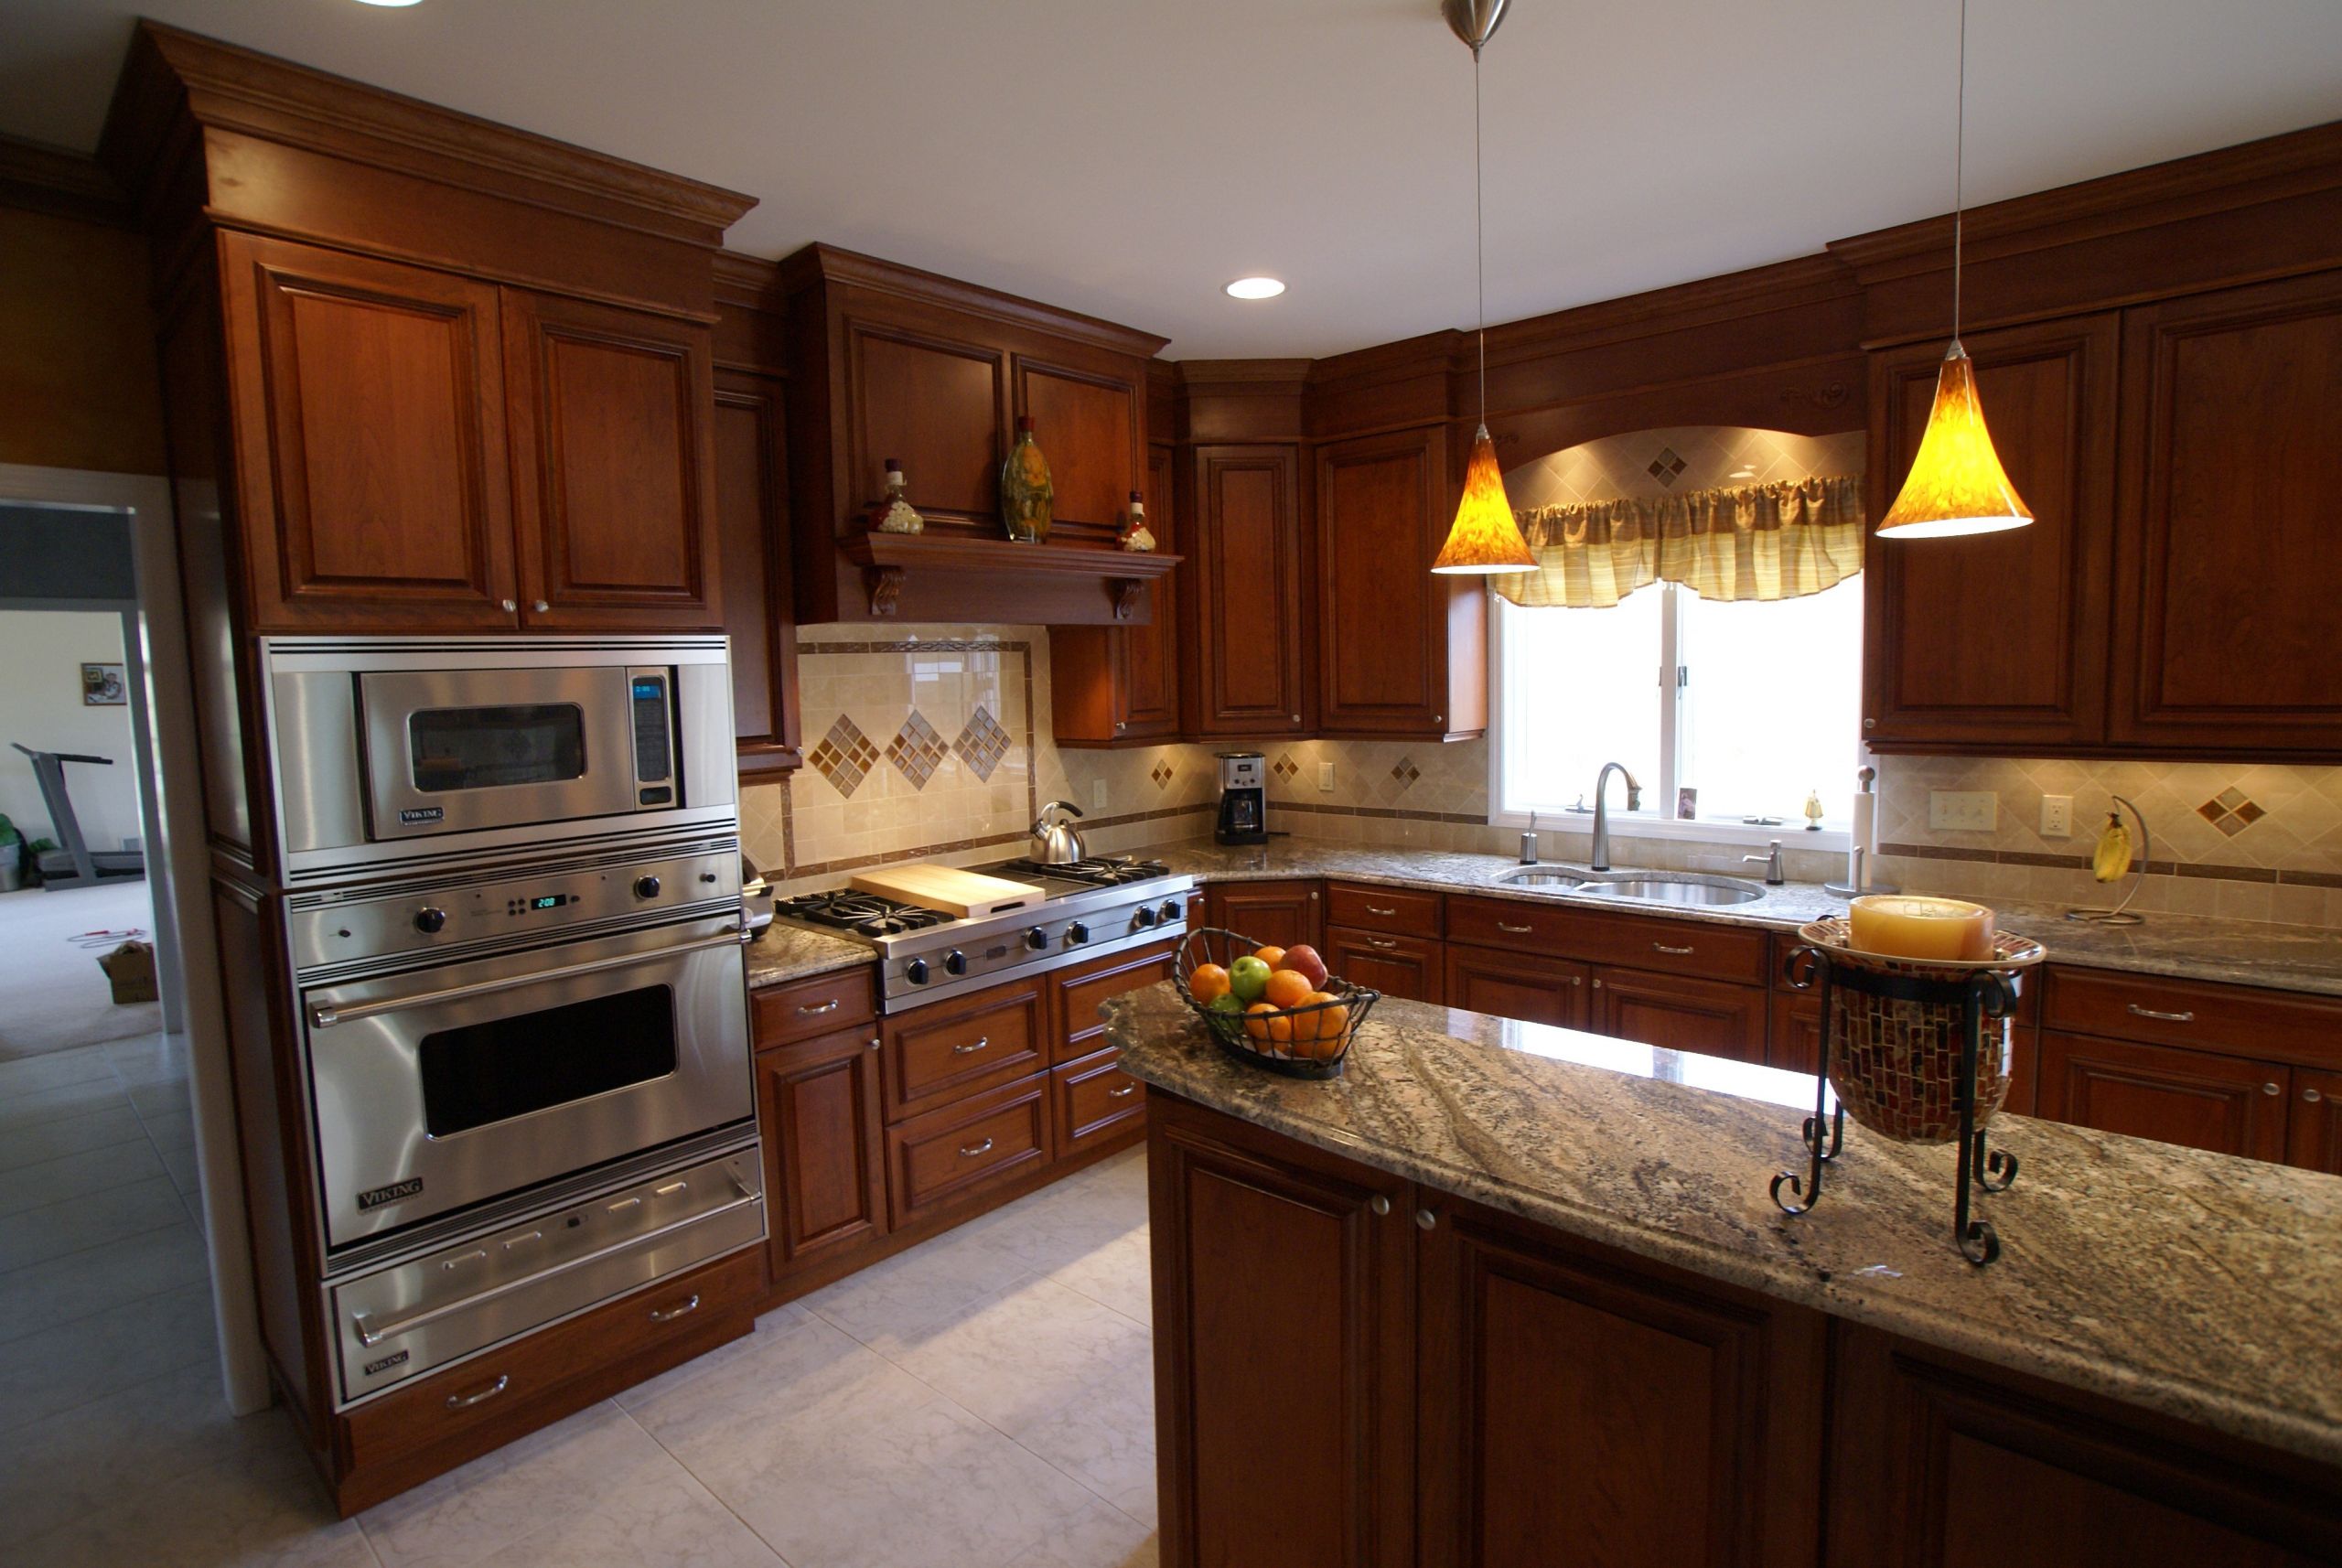 Remodeled Kitchen Ideas
 Monmouth County Kitchen Remodeling Ideas to Inspire You